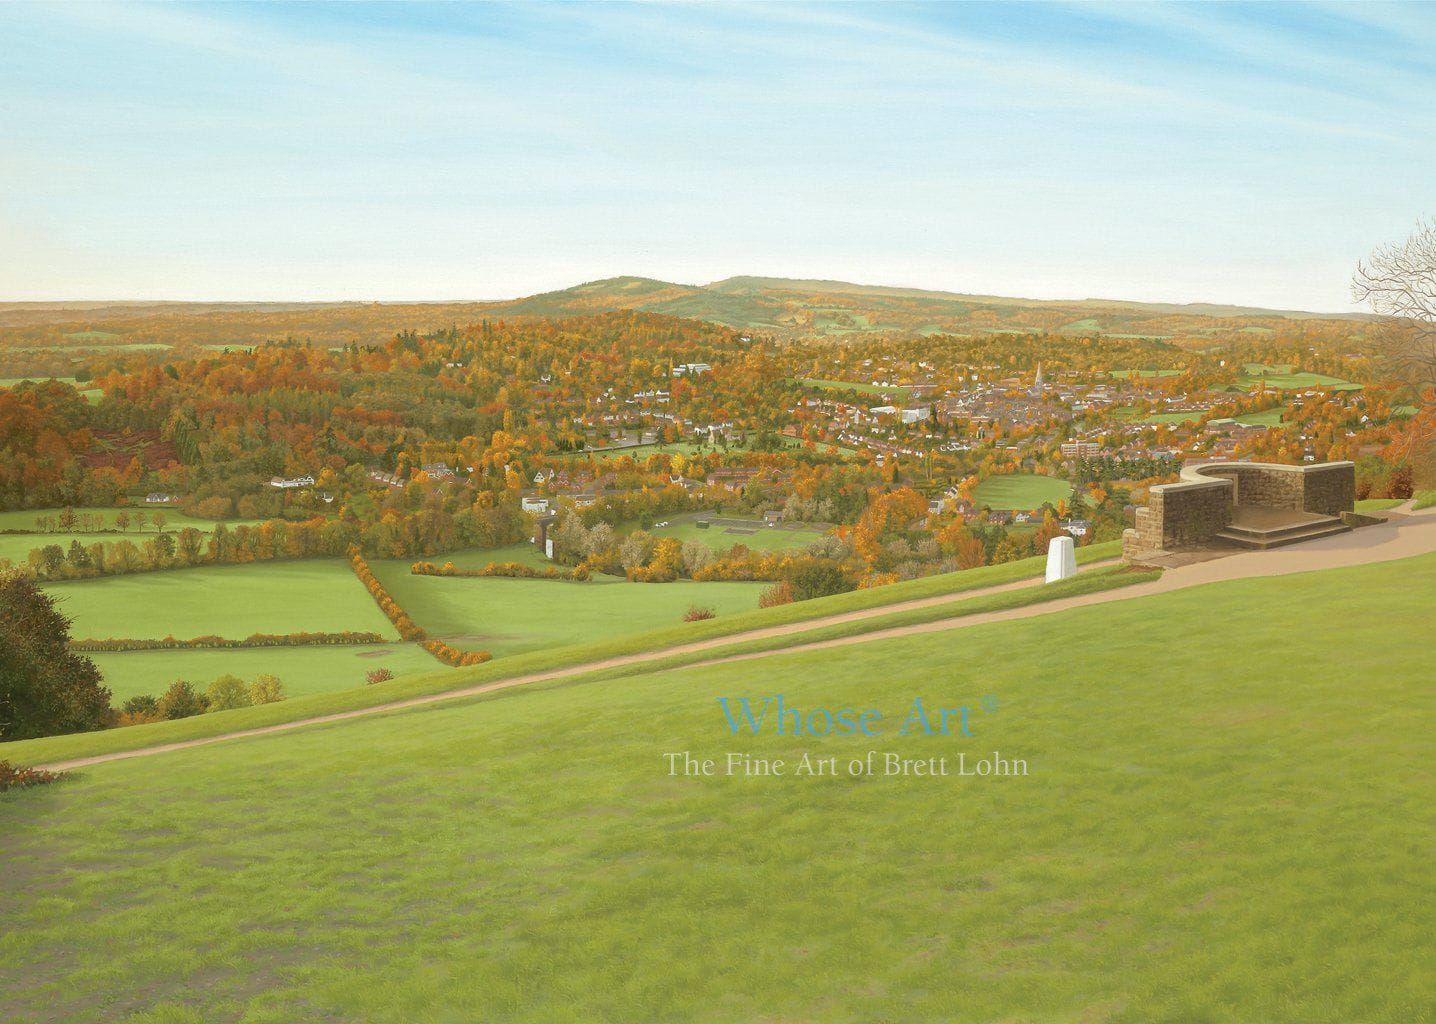 Landscape Greeting Card showing a painting of the view from the National Trust's Box Hill, across the Downs, in autumn.